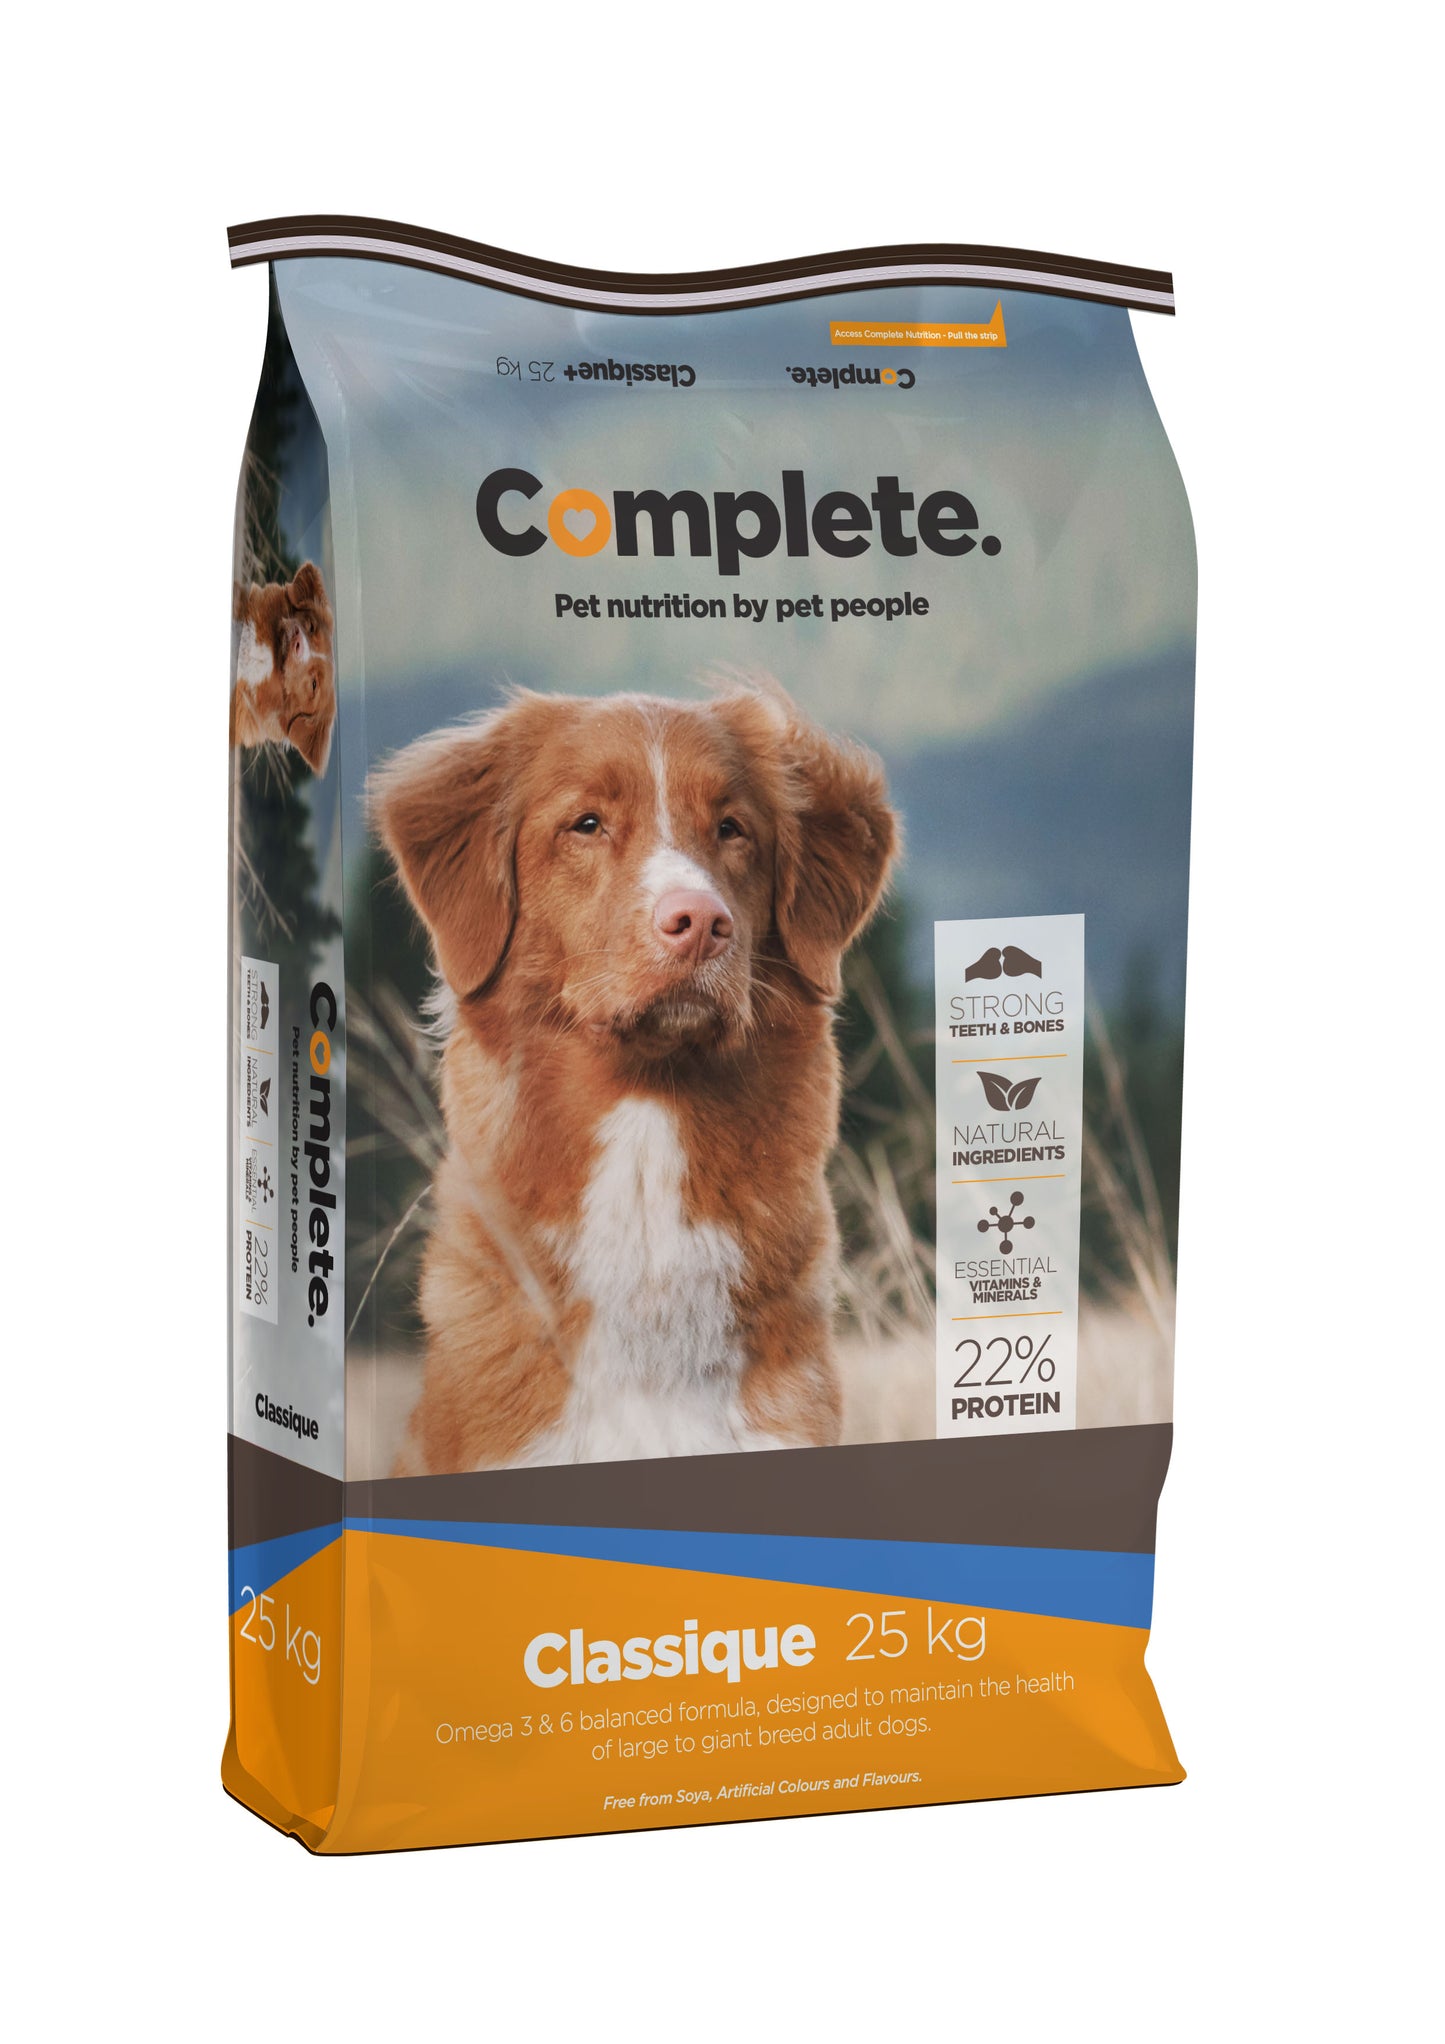 Classique+ 25kg Complete Pet Food For Large & Giant breed adult dogs from Pets Planet - South Africa’s No.1 Online Pet Store for premium pet products, best pet store near me, Dog food, pet food, dog wet food, dog bed, dog beds, washable dog bed, takealot dog bed, plush dog bed, Complete Pet Nutrition, Complete pet nutrition dog food, hills dog food, optimizor dog food, royal canin dog food, jock dog food, bobtail dog food, canine cuisine, acana dog food, best dog food, dog food near me, best dog food brands